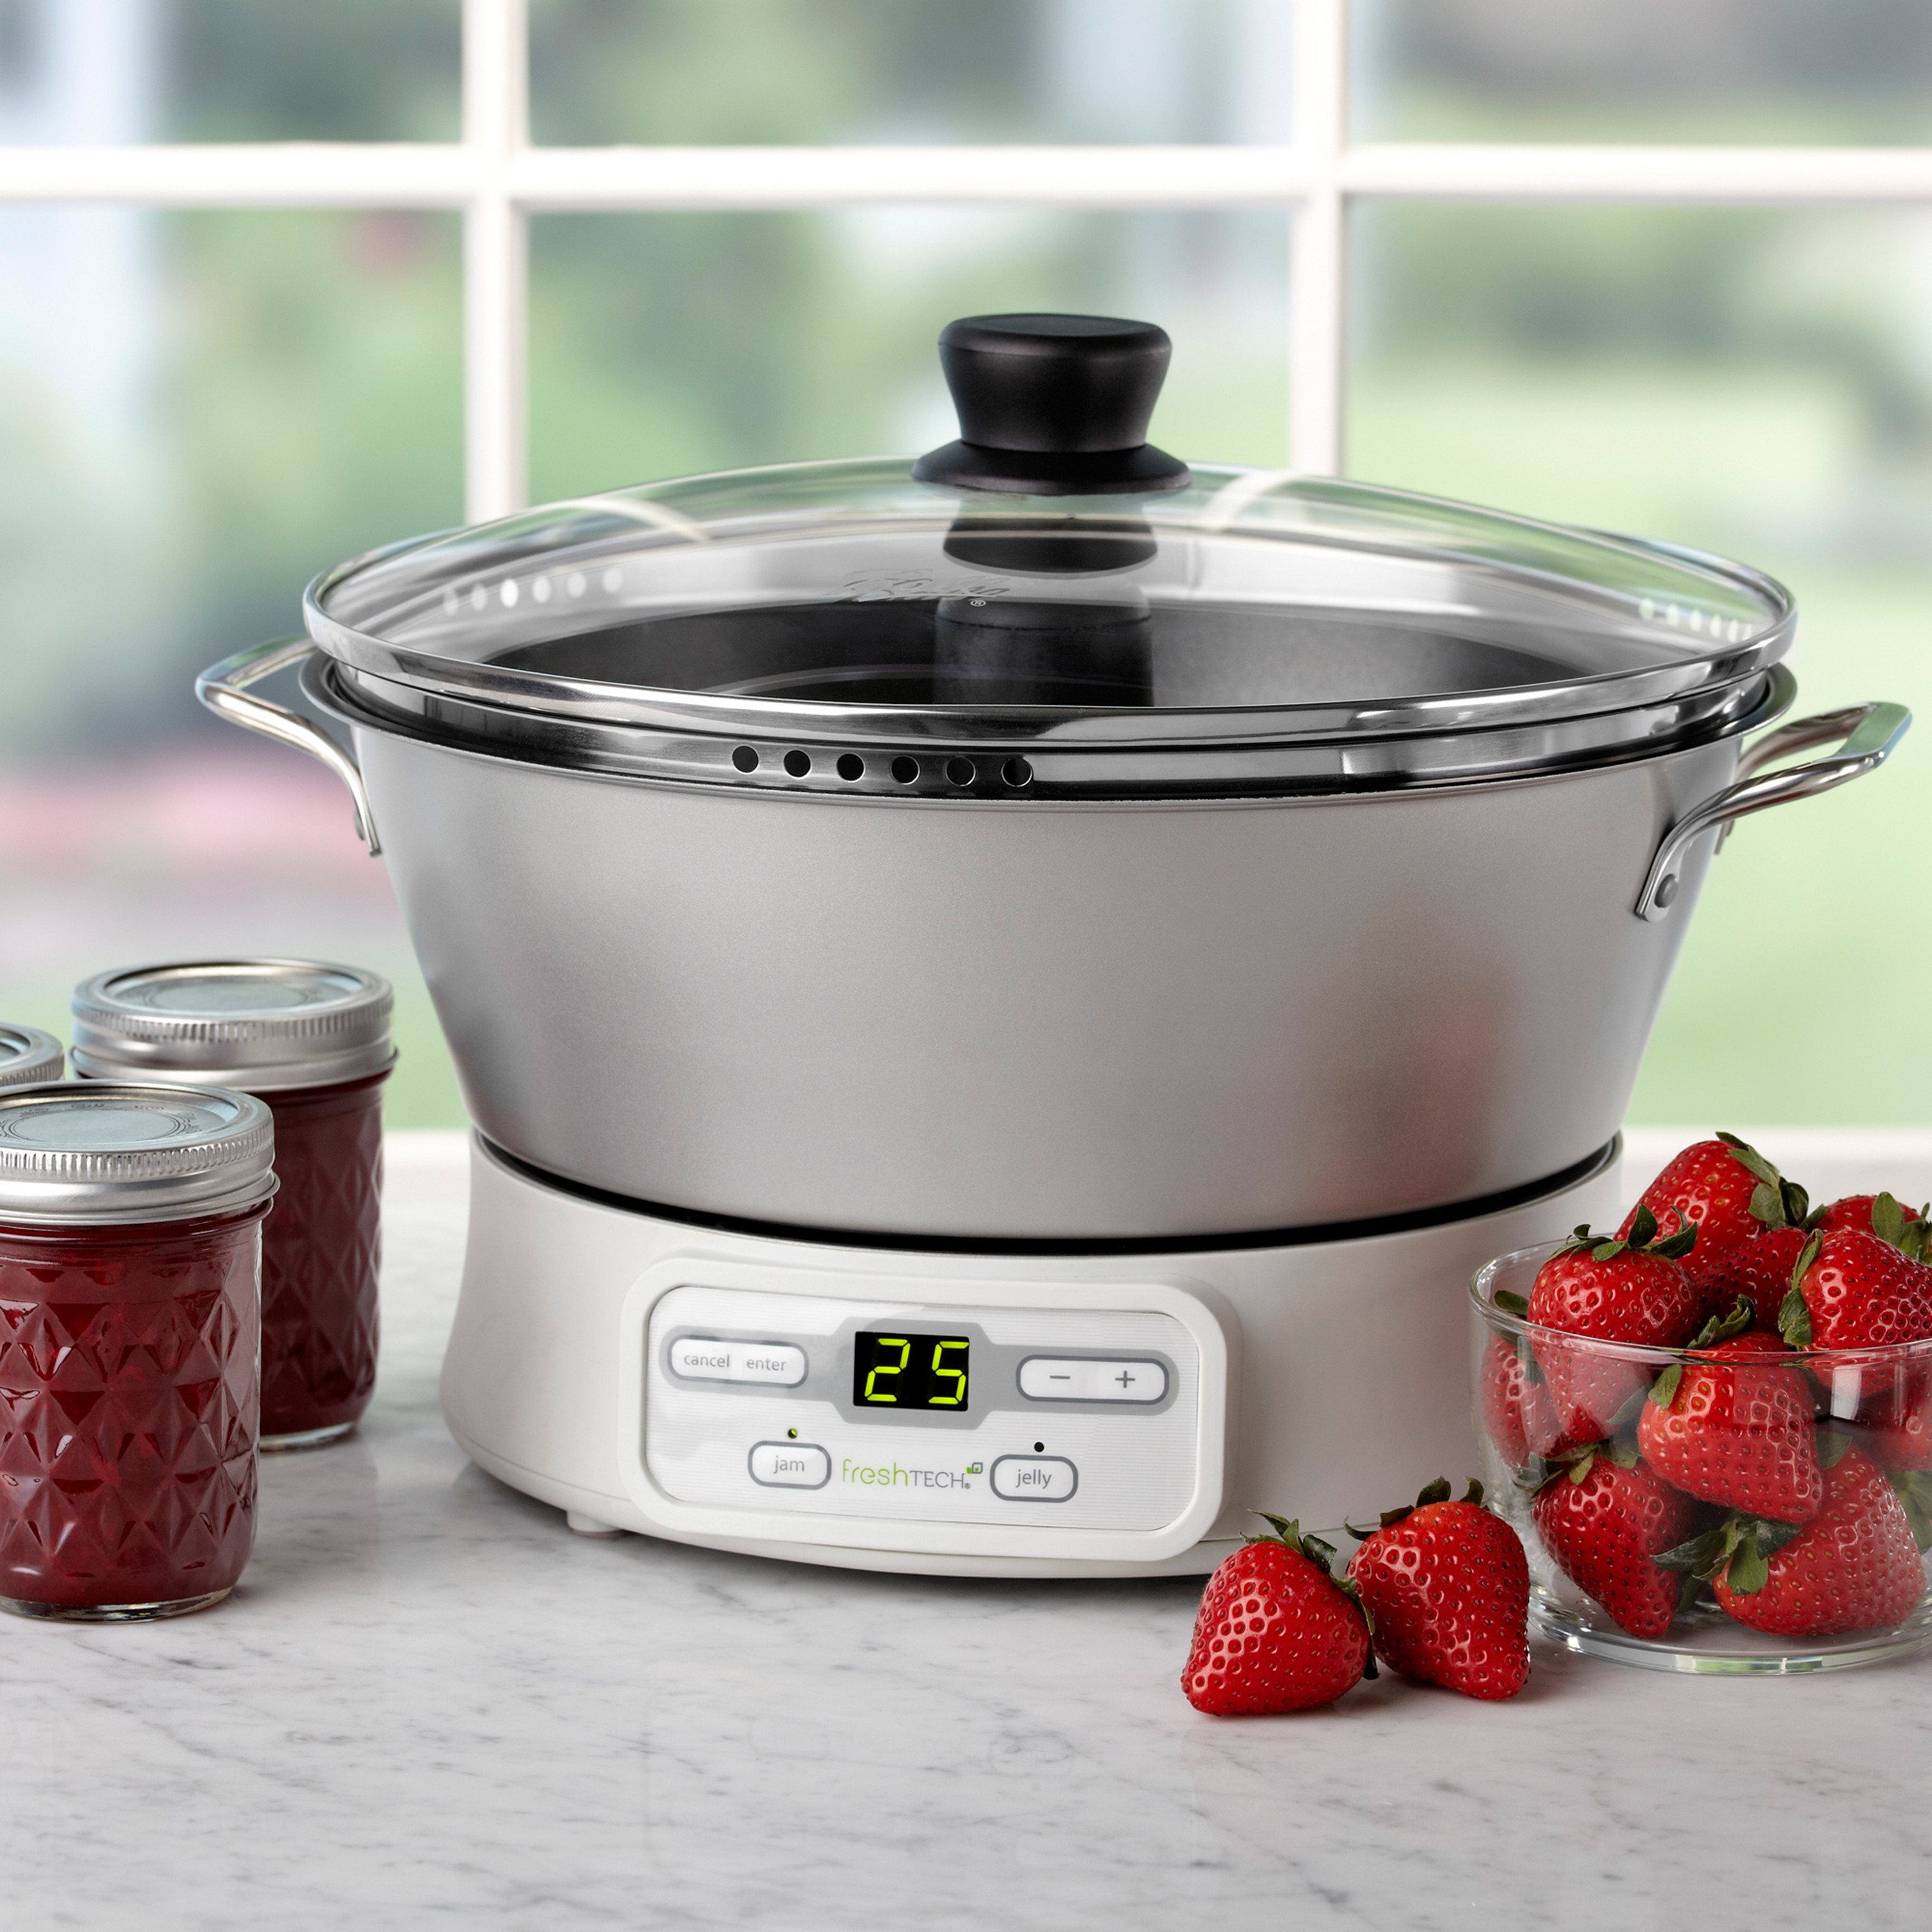 Jarden Home Brands 35005 Automatic Jam & Jelly Maker - image 3 of 9